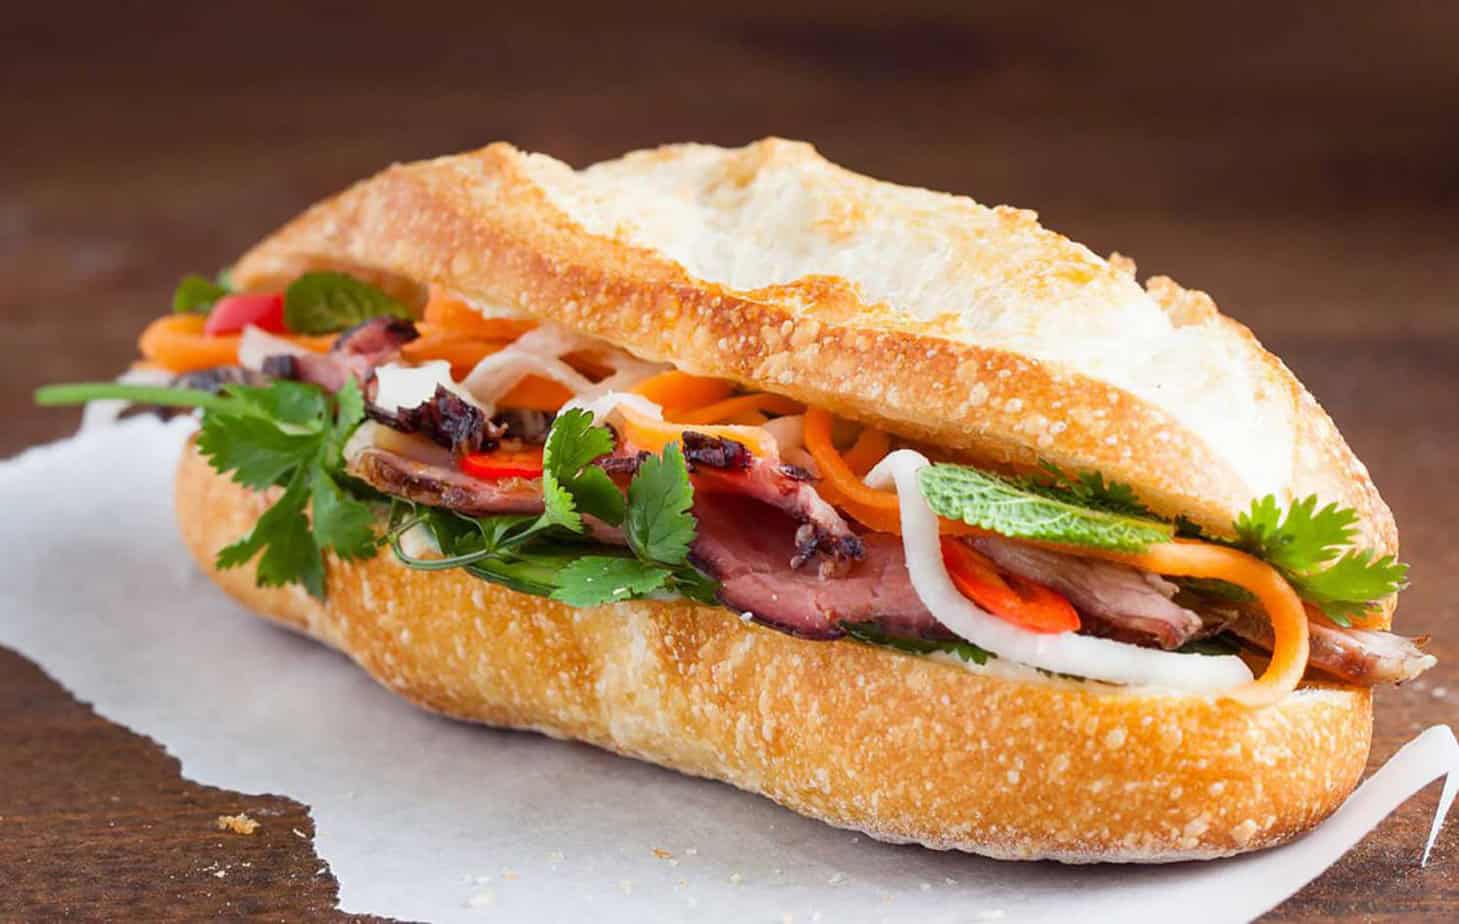 Must-Try Dishes in Vietnam - Bánh Mì